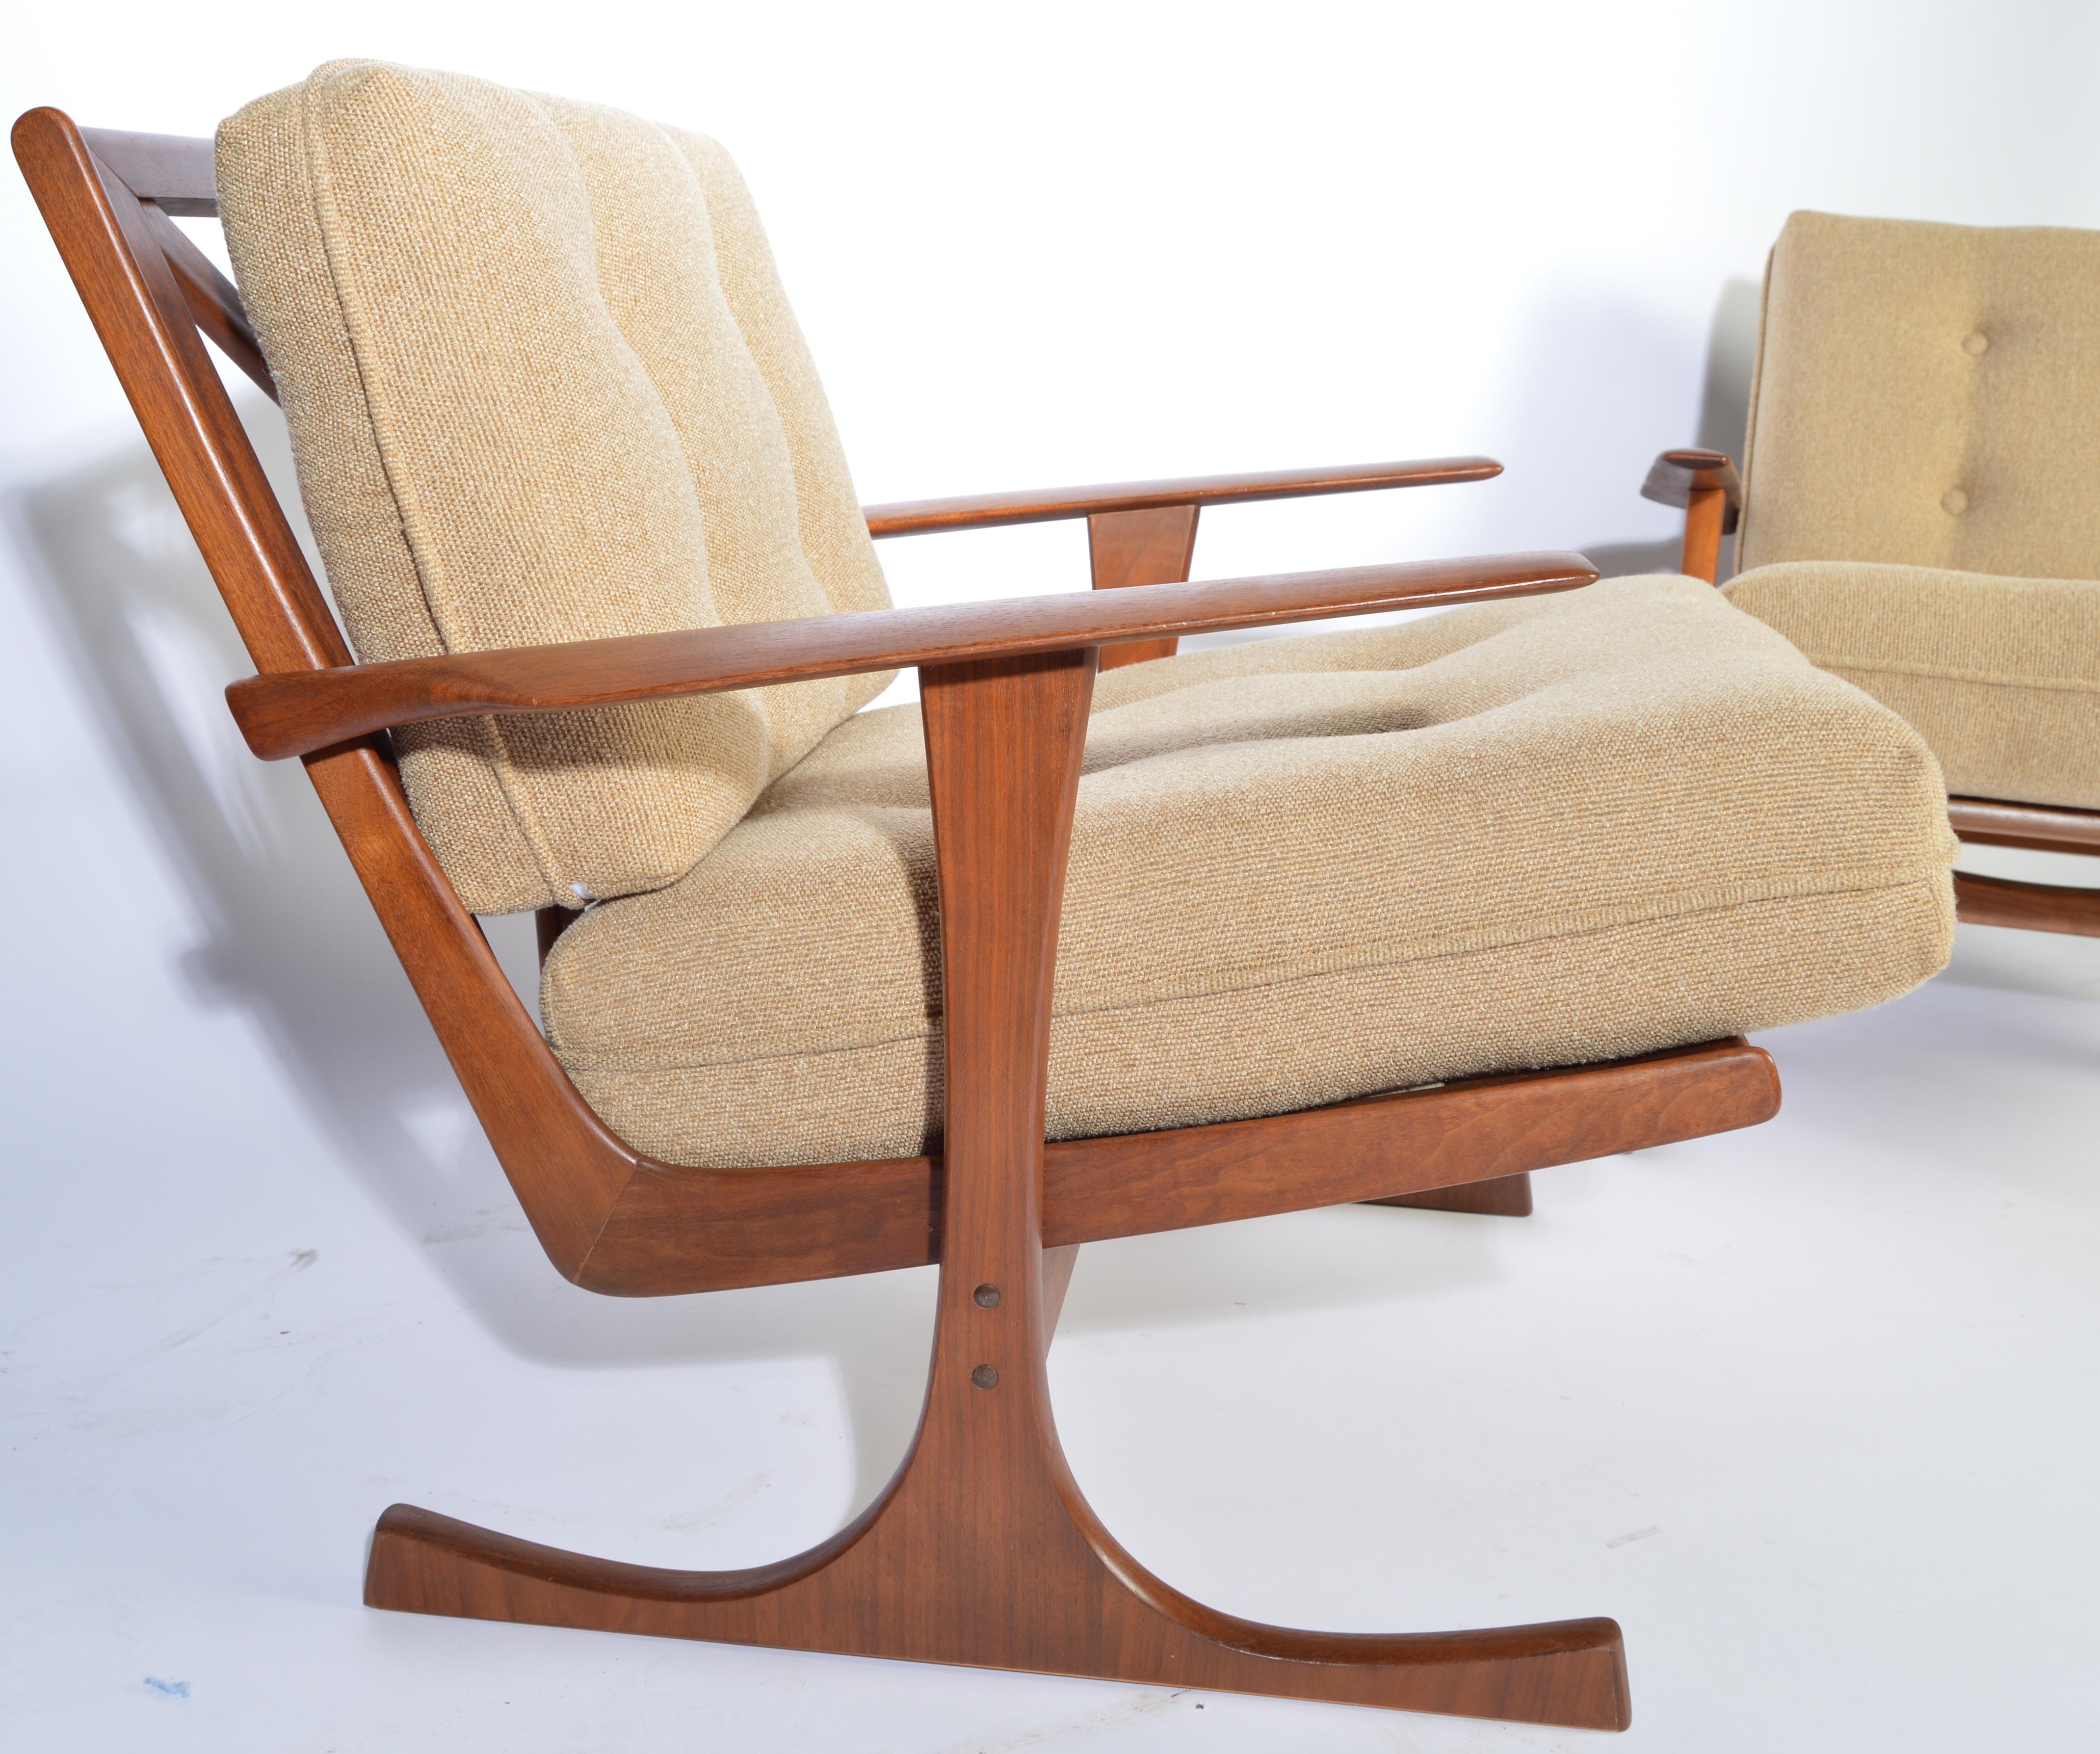 Scarce Ib Kofod-Larsen for Selig-Denmark splayed leg lounge chairs in teak having new Fagas suspension straps.
Outstanding overall condition. Masterfully refinished. Solid and ready for use,
circa 1960.